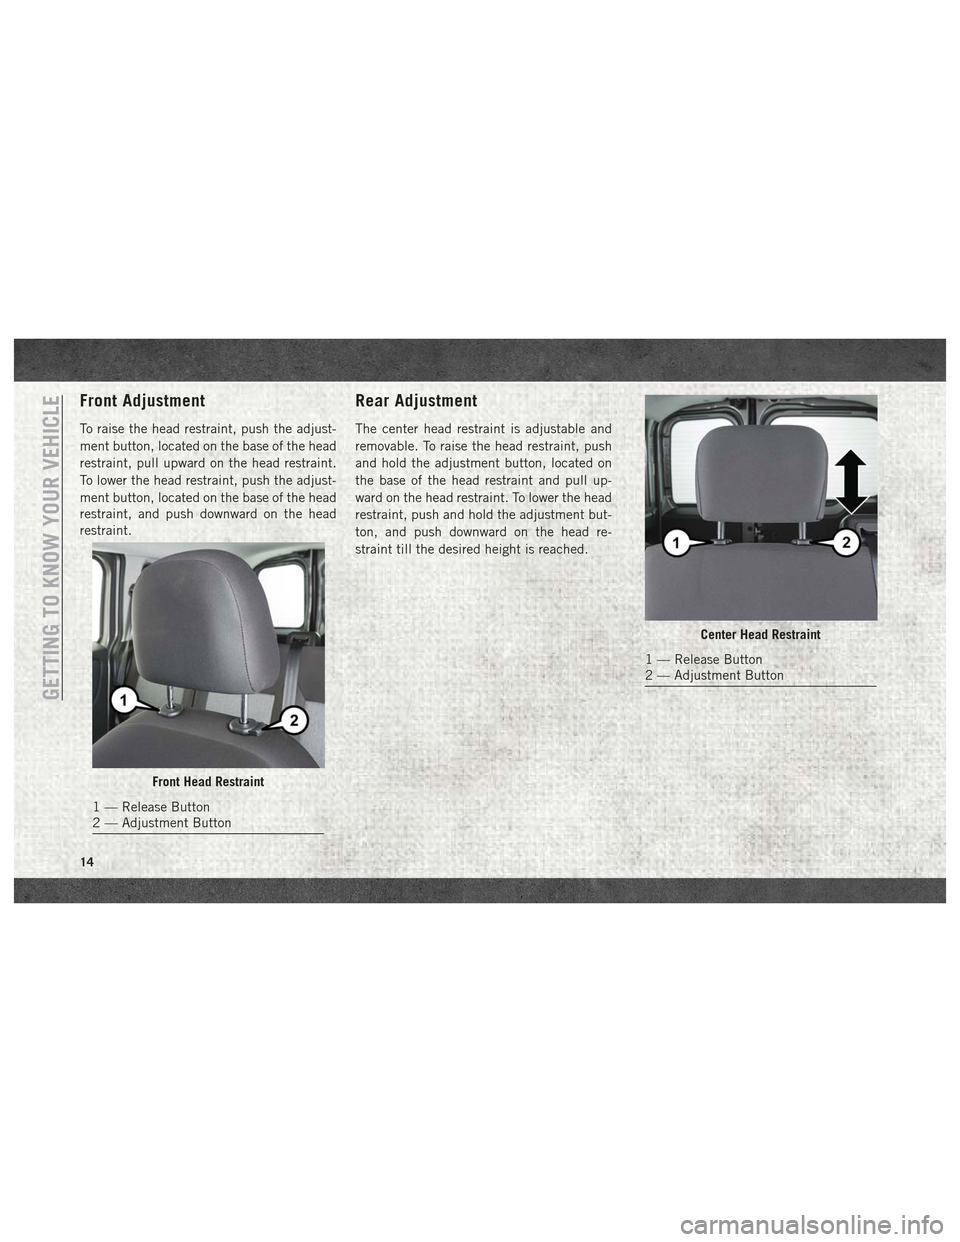 Ram ProMaster City 2018 Owners Manual Front Adjustment
To raise the head restraint, push the adjust-
ment button, located on the base of the head
restraint, pull upward on the head restraint.
To lower the head restraint, push the adjust-
